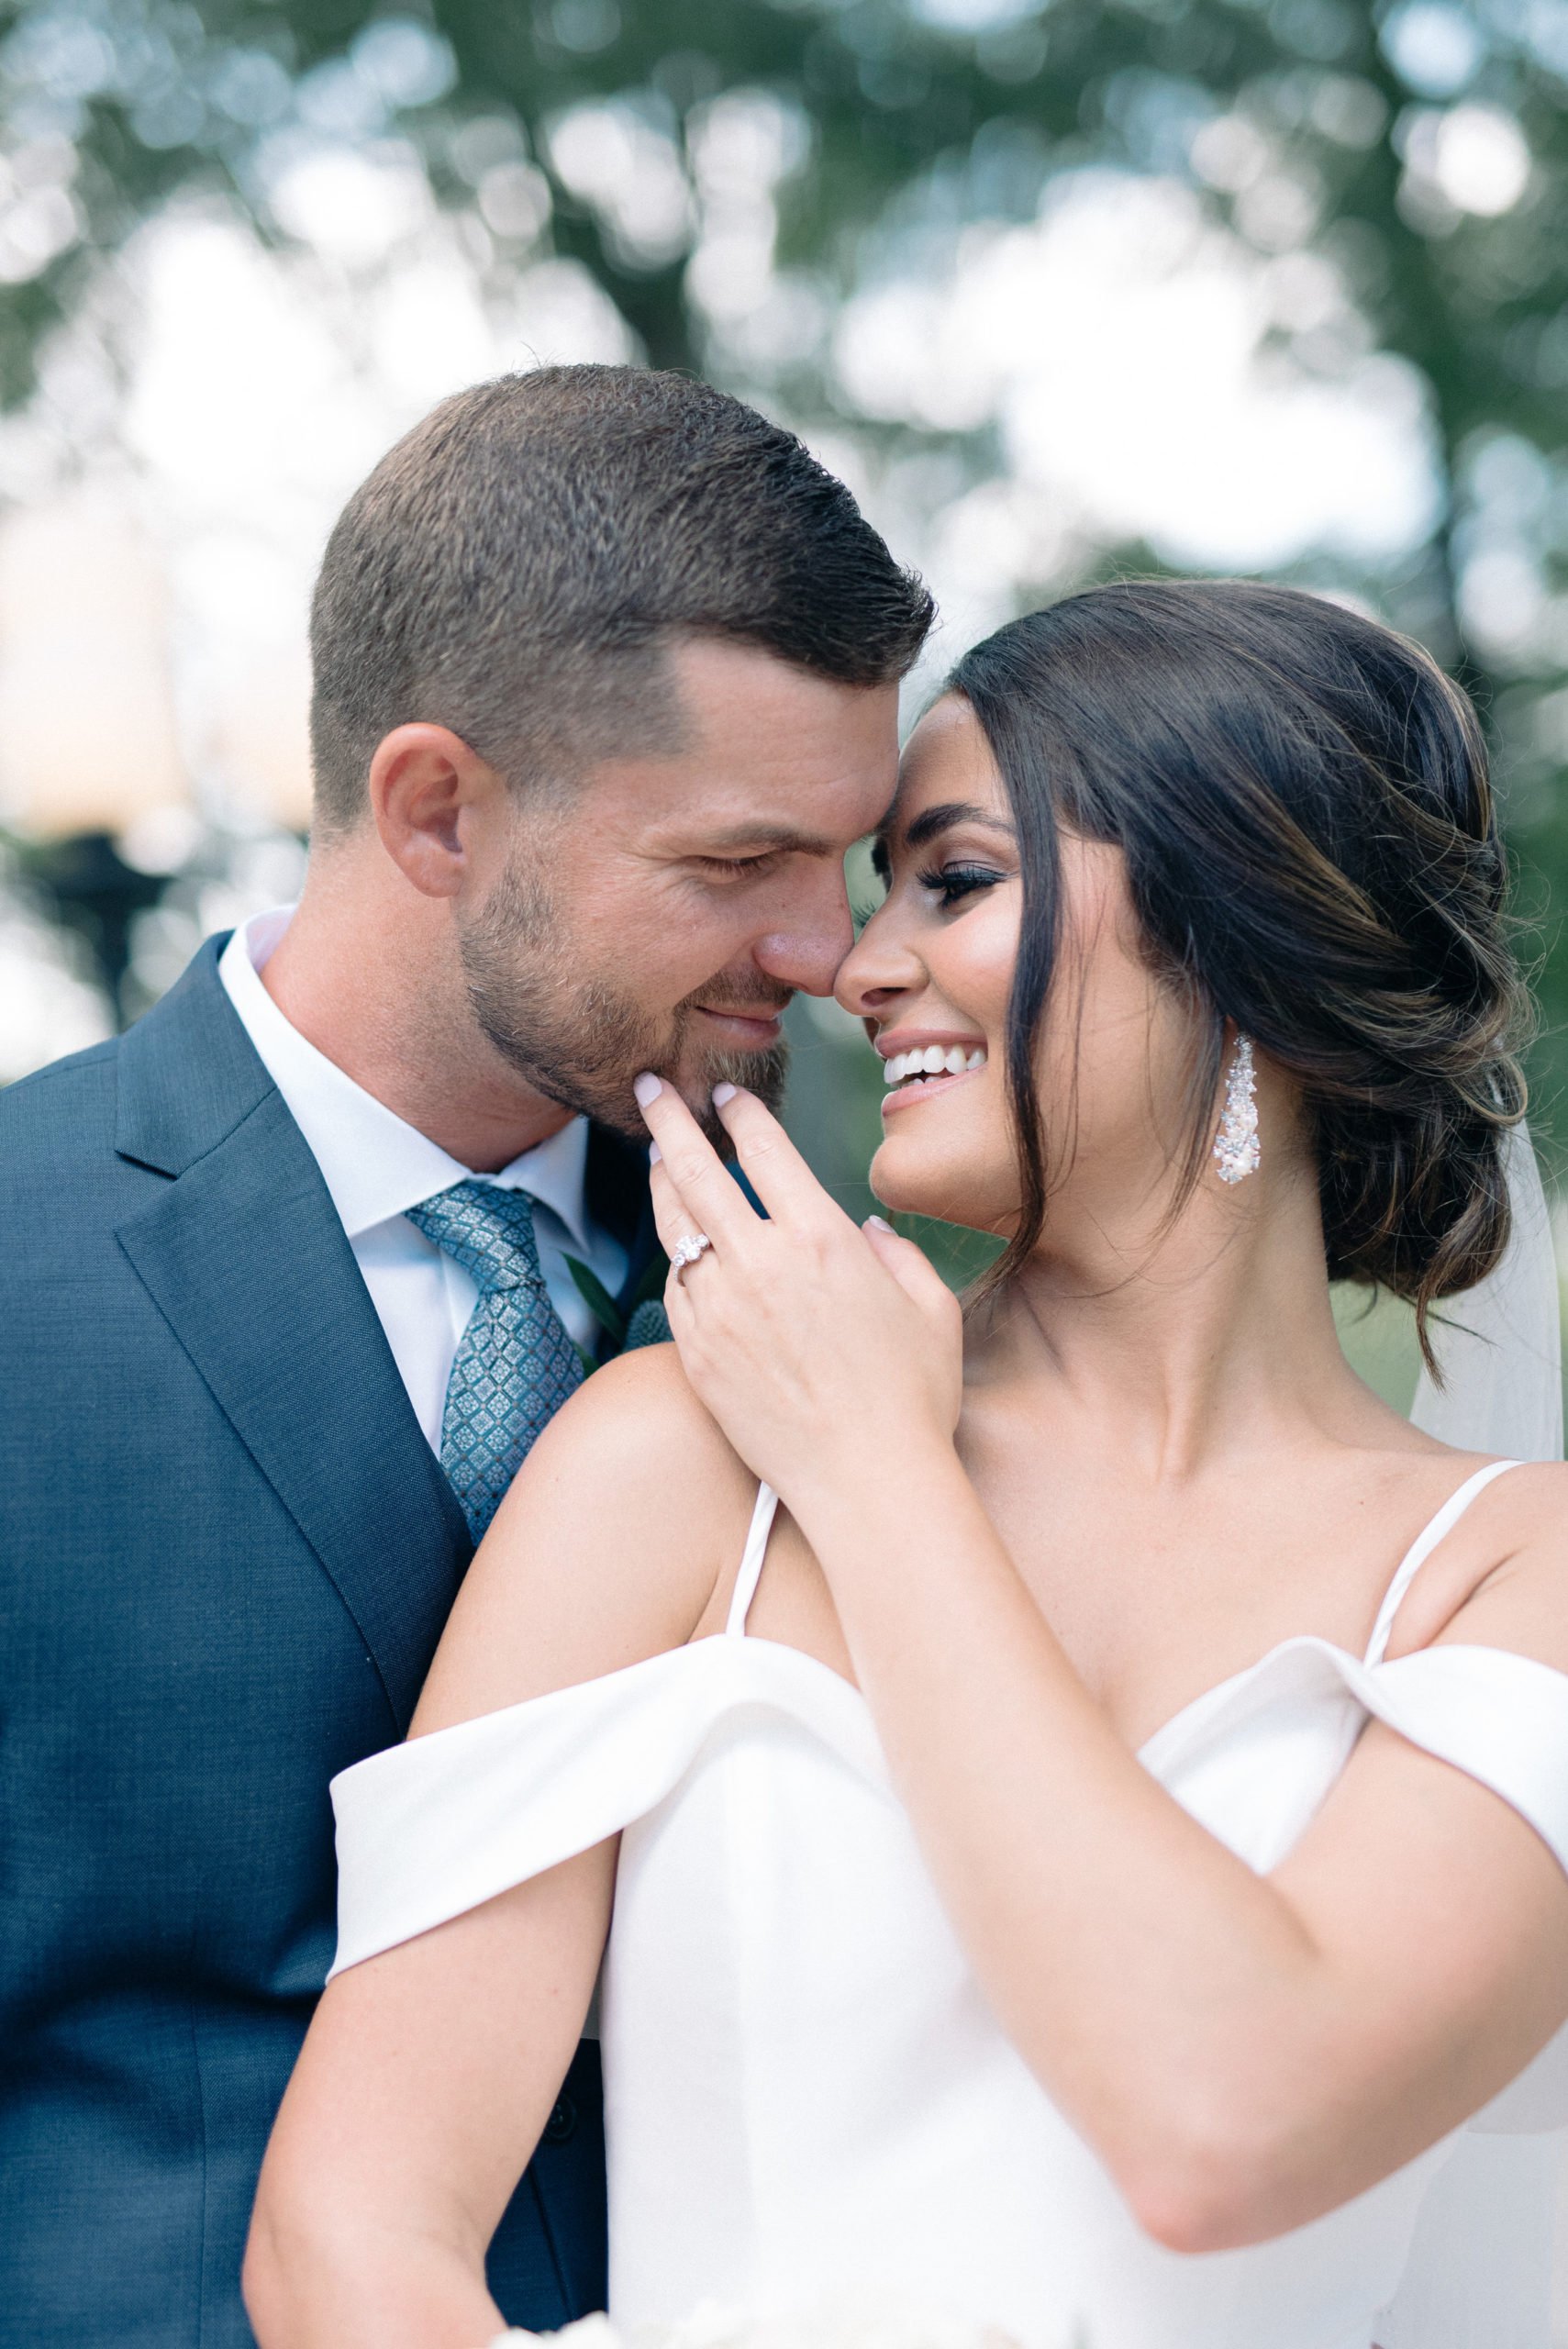 Beautiful wedding portraits for married couple at Oak Island Mansion in Alabama